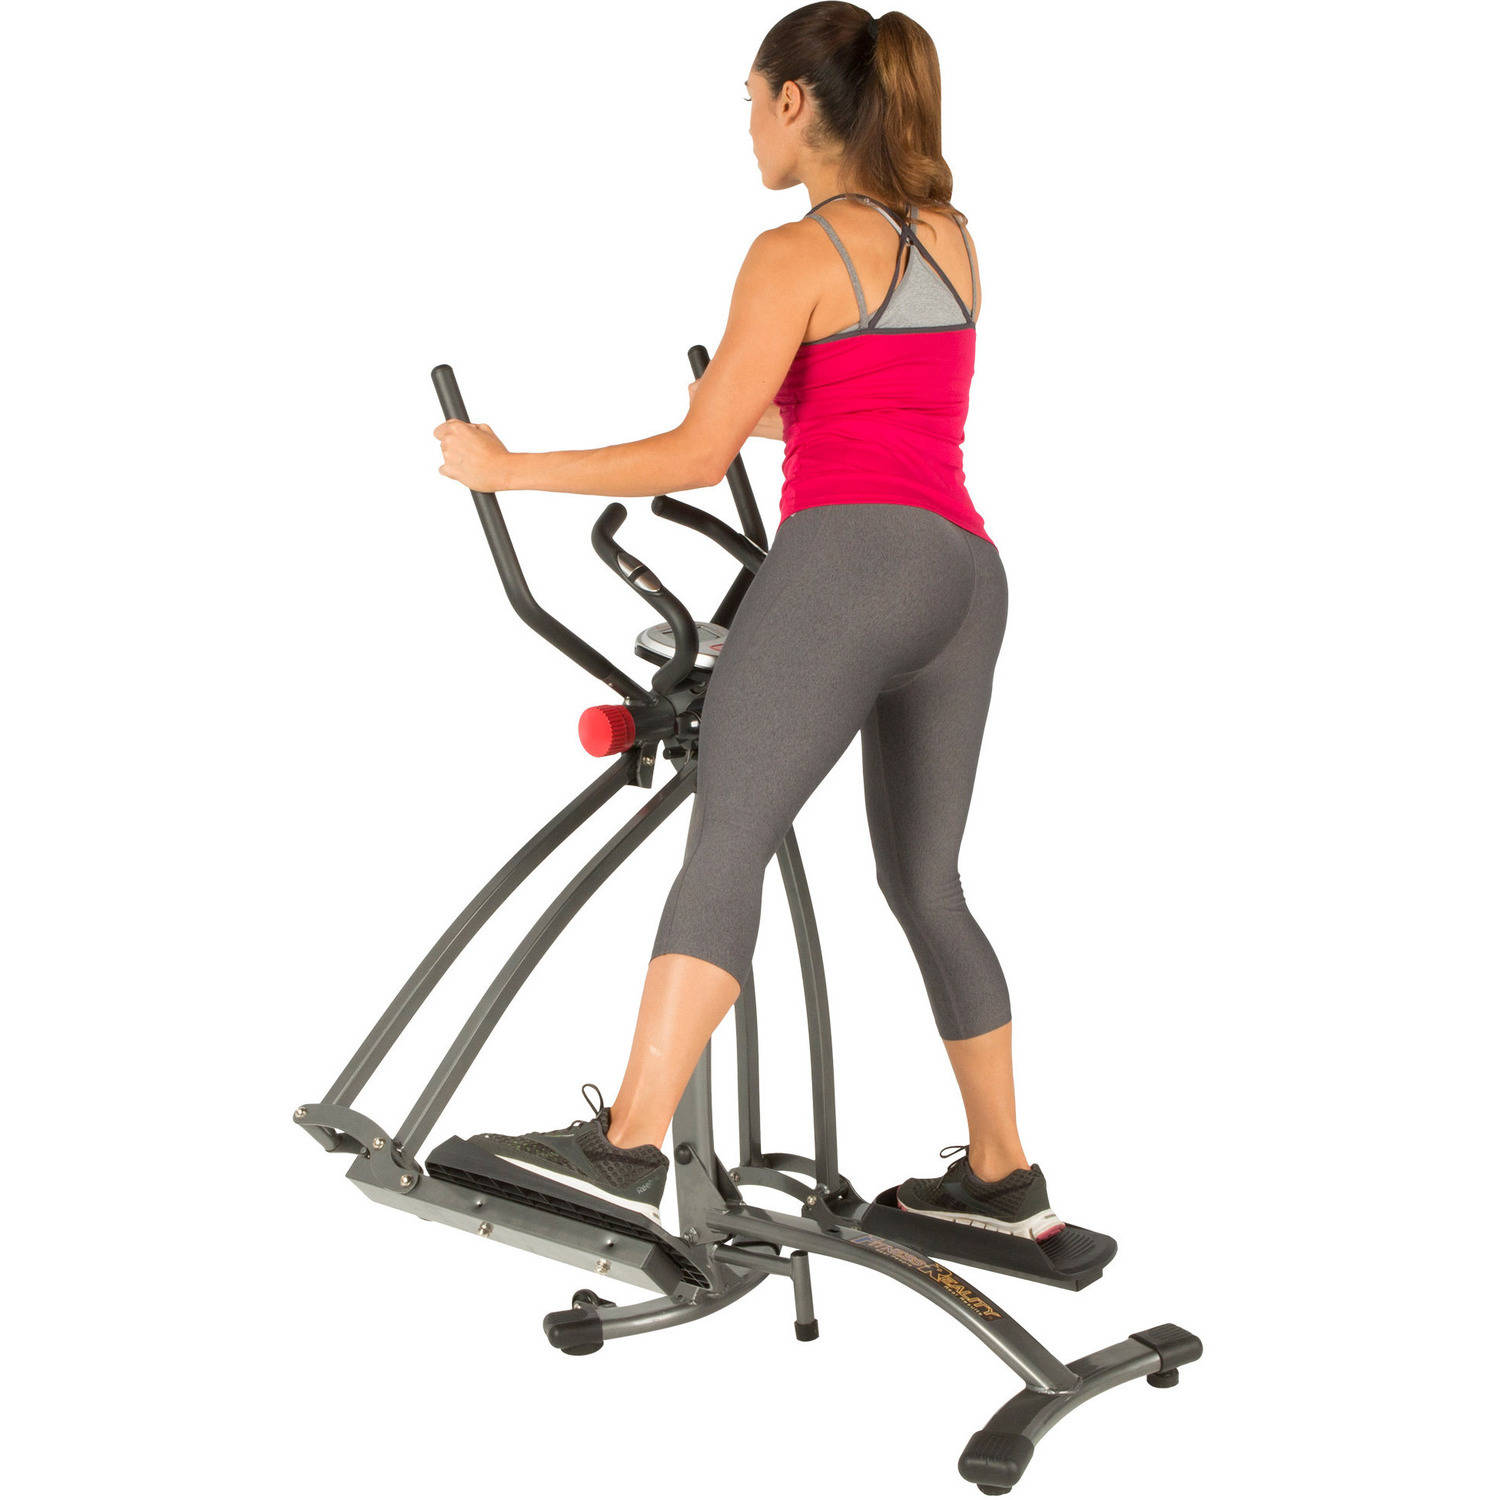 Fitness Reality Multi-Direction Elliptical Cloud Walker X1 with Pulse Sensors - image 22 of 31